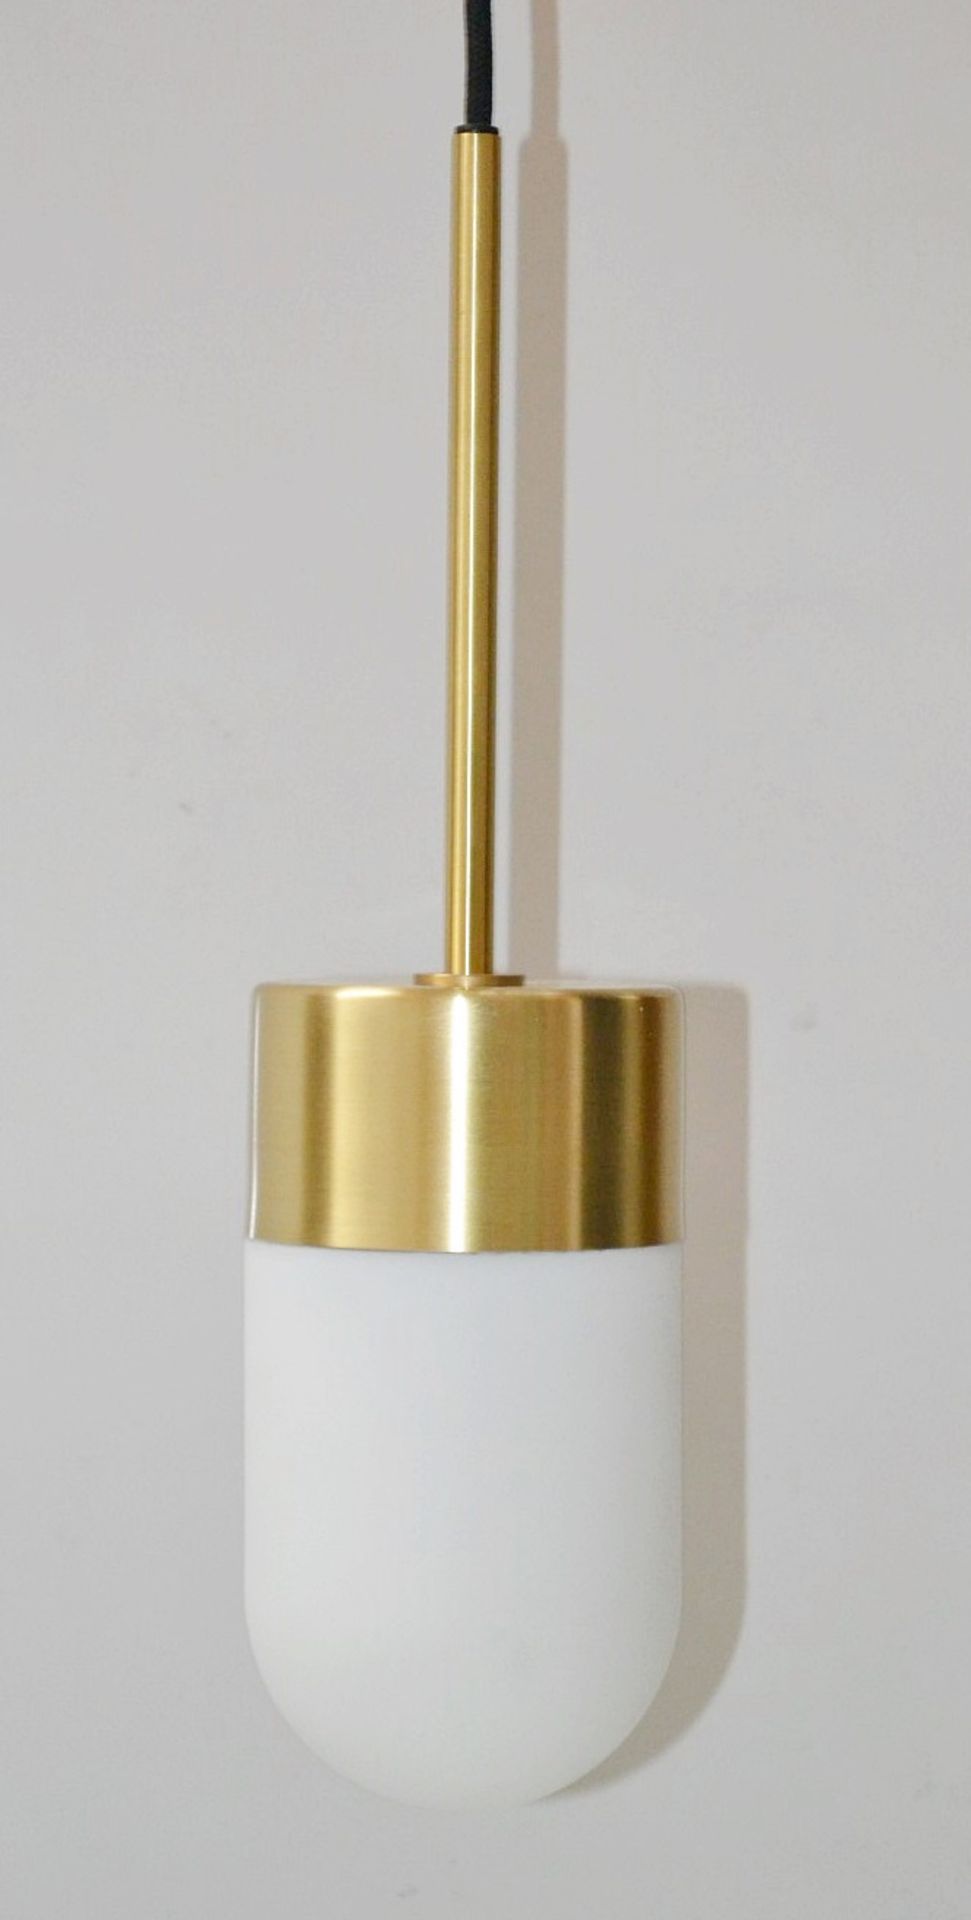 A Pair Of Rubn 'VOX' Commercial Pendant Lights In Polished Brass - Original Value £487.00 - Image 2 of 5